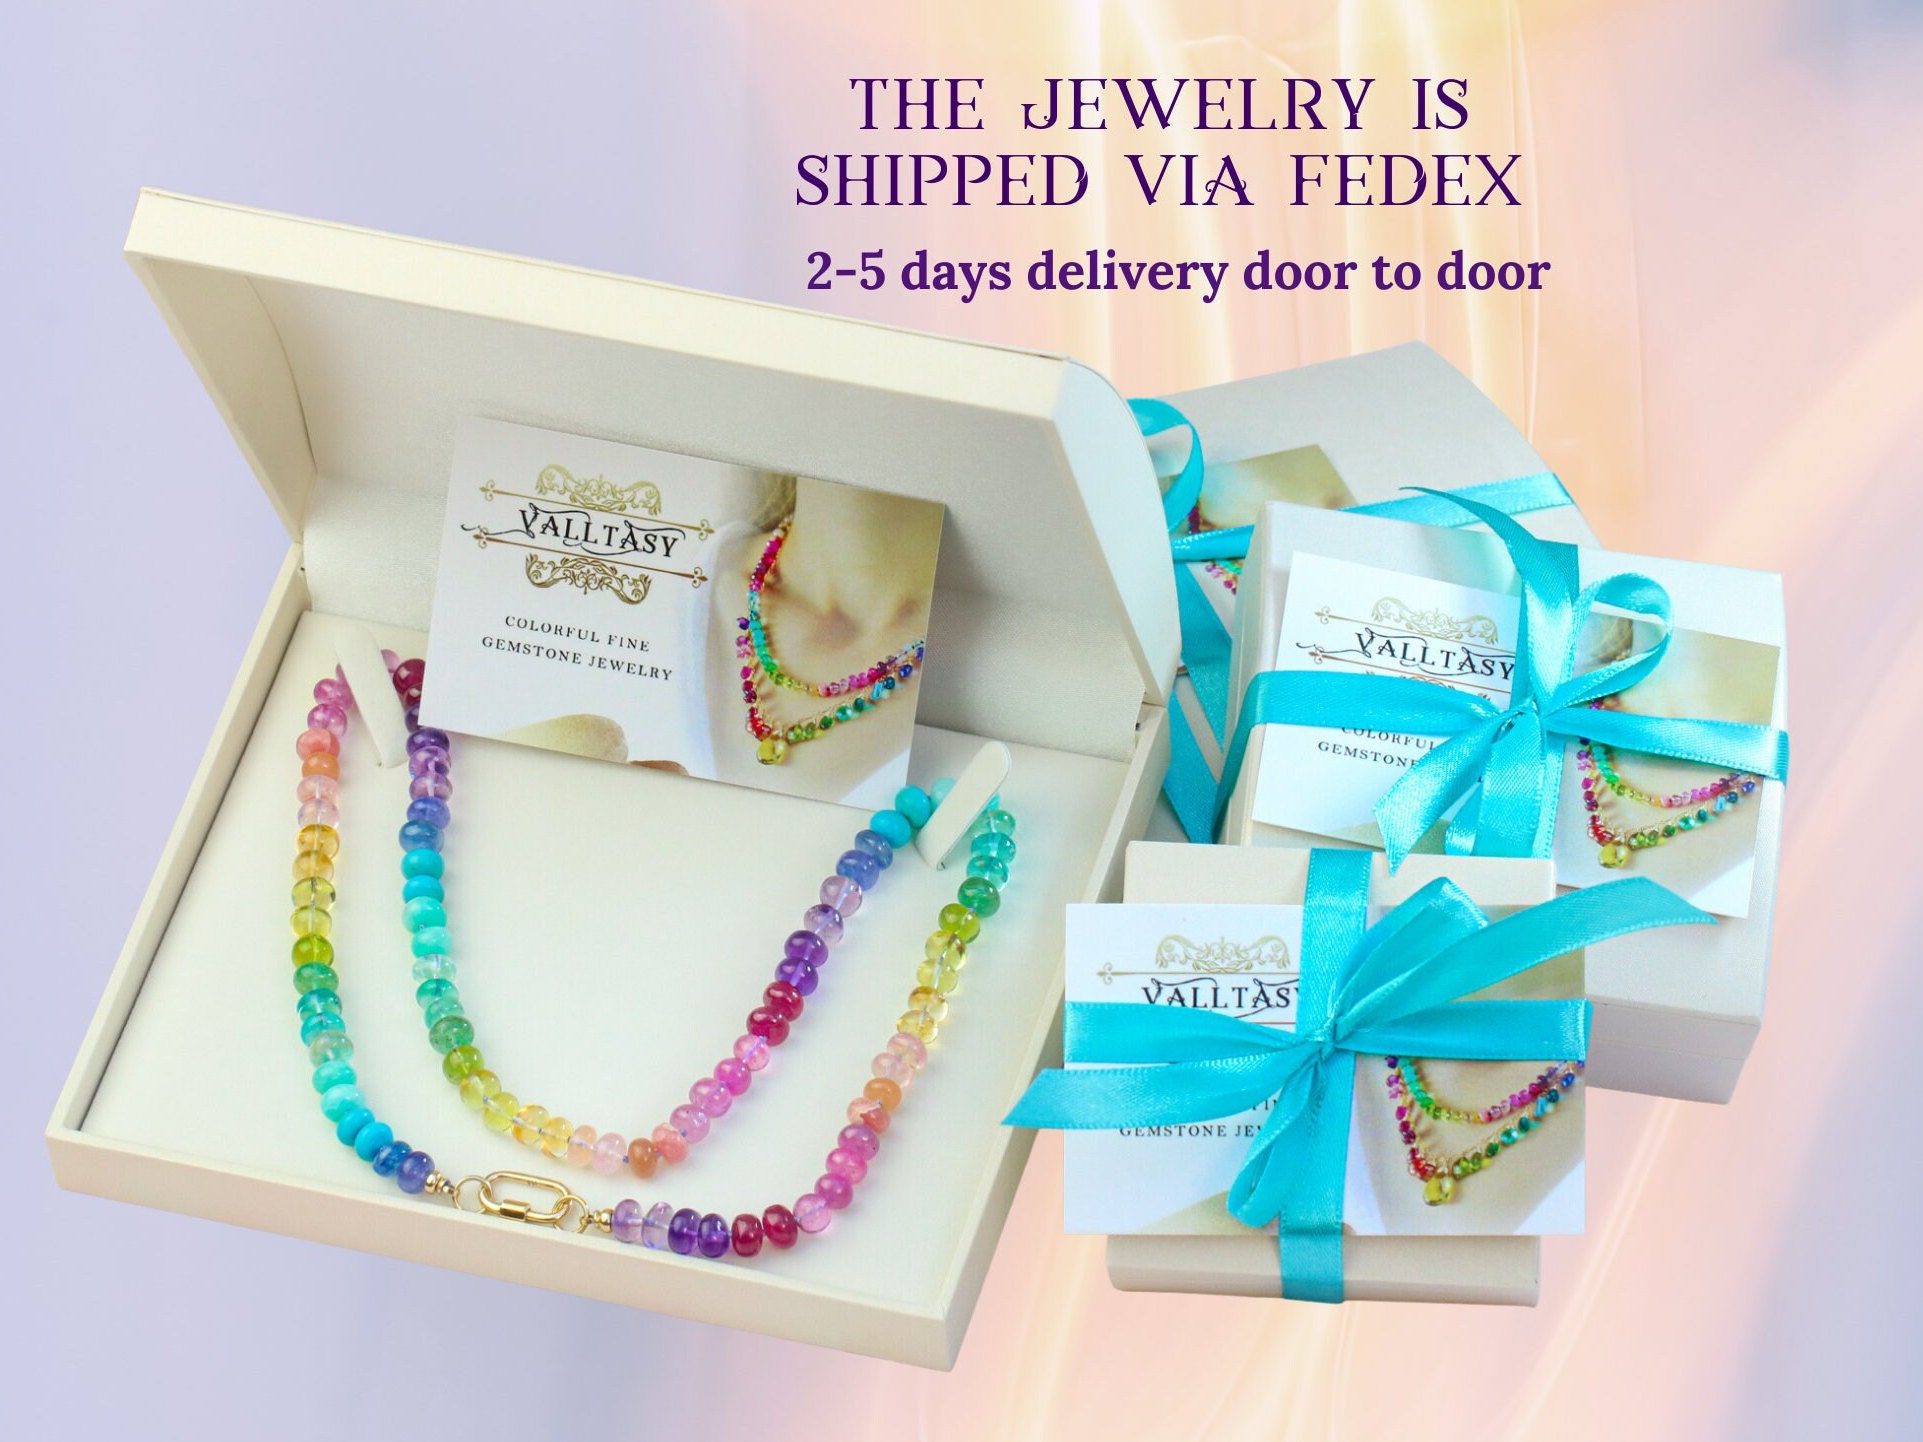 Solid Gold 14K Rainbow Silk Knotted Necklace, Multi Gemstone Necklace with a Repeating Rainbow